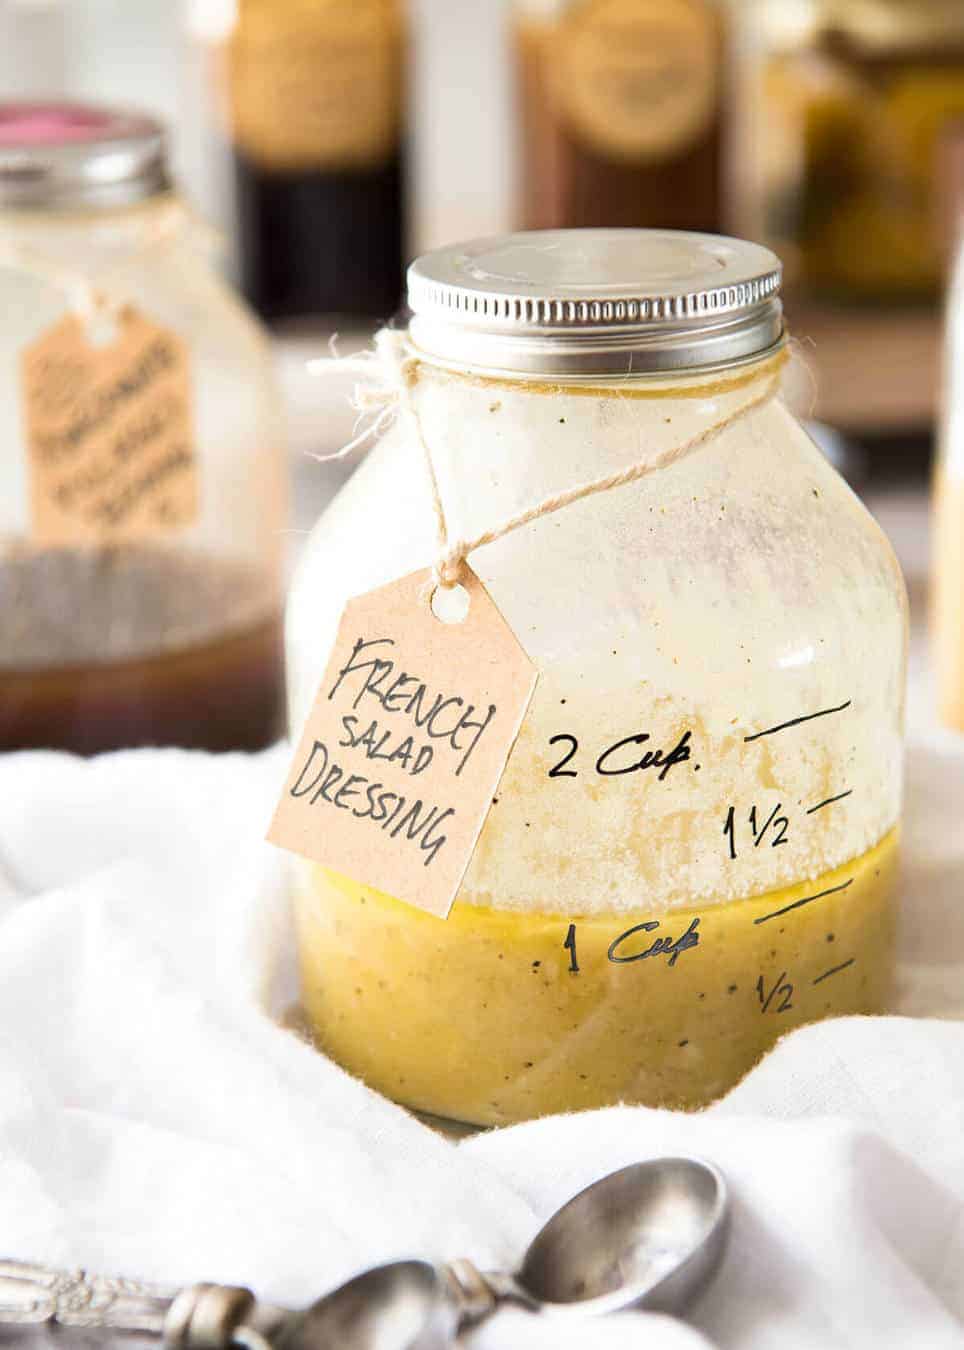 French Salad Dressing (French Vinaigrette) - Made with olive oil, mustard, white wine vinegar and eschalot/shallot. Keeps for up to 2 weeks. recipetineats.com